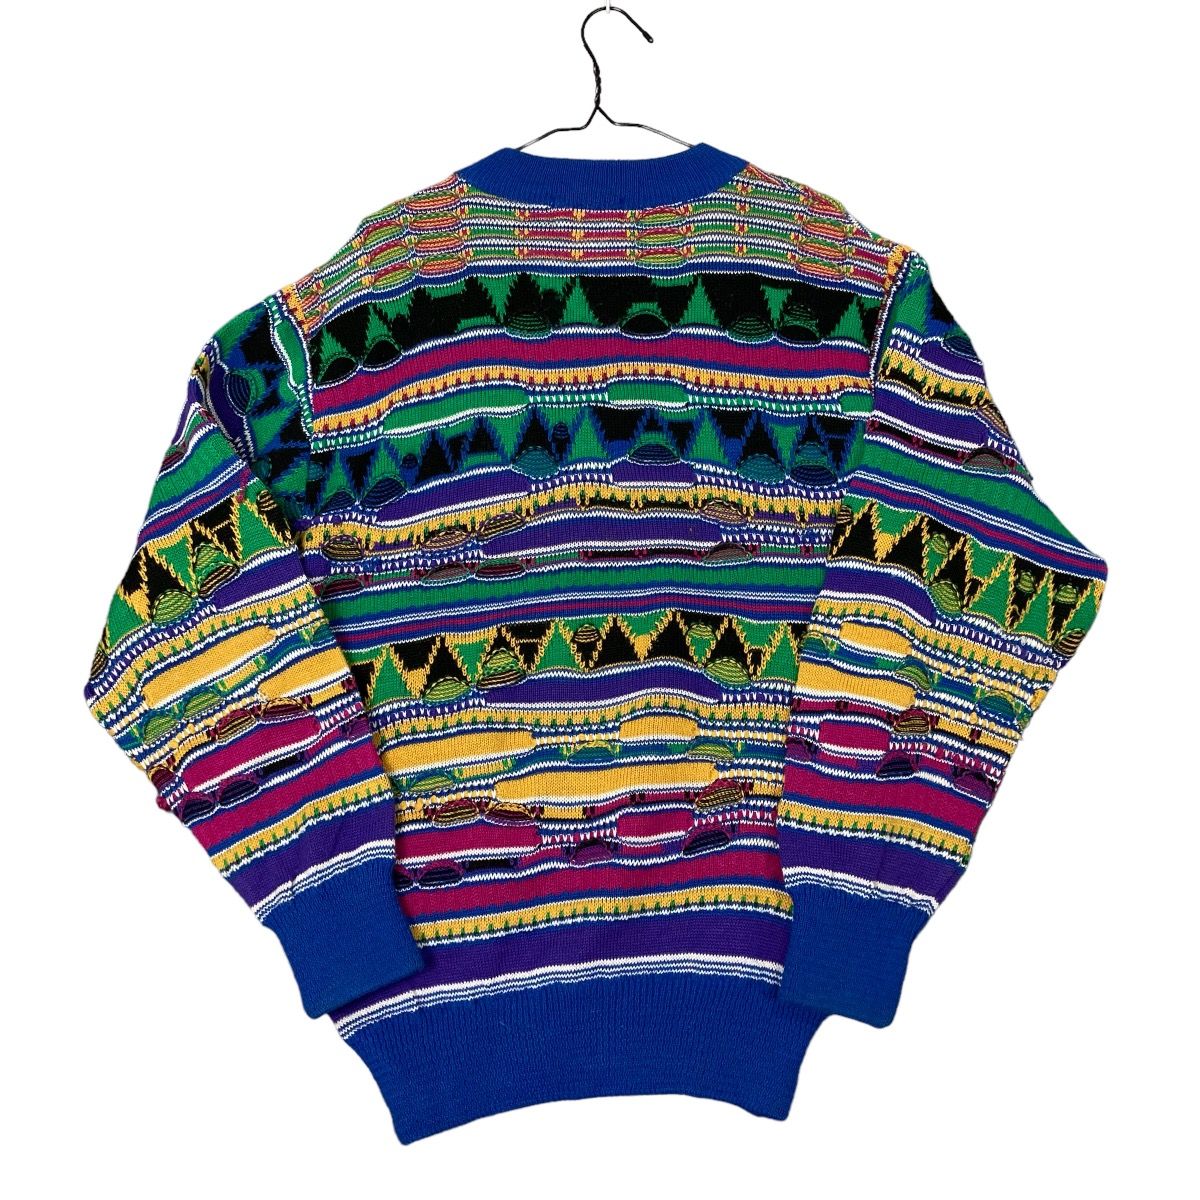 Vintage Crazy Vintage 90s Coogi Style 3D Knit Heavy Weight Sweater Size US L / EU 52-54 / 3 - 2 Preview